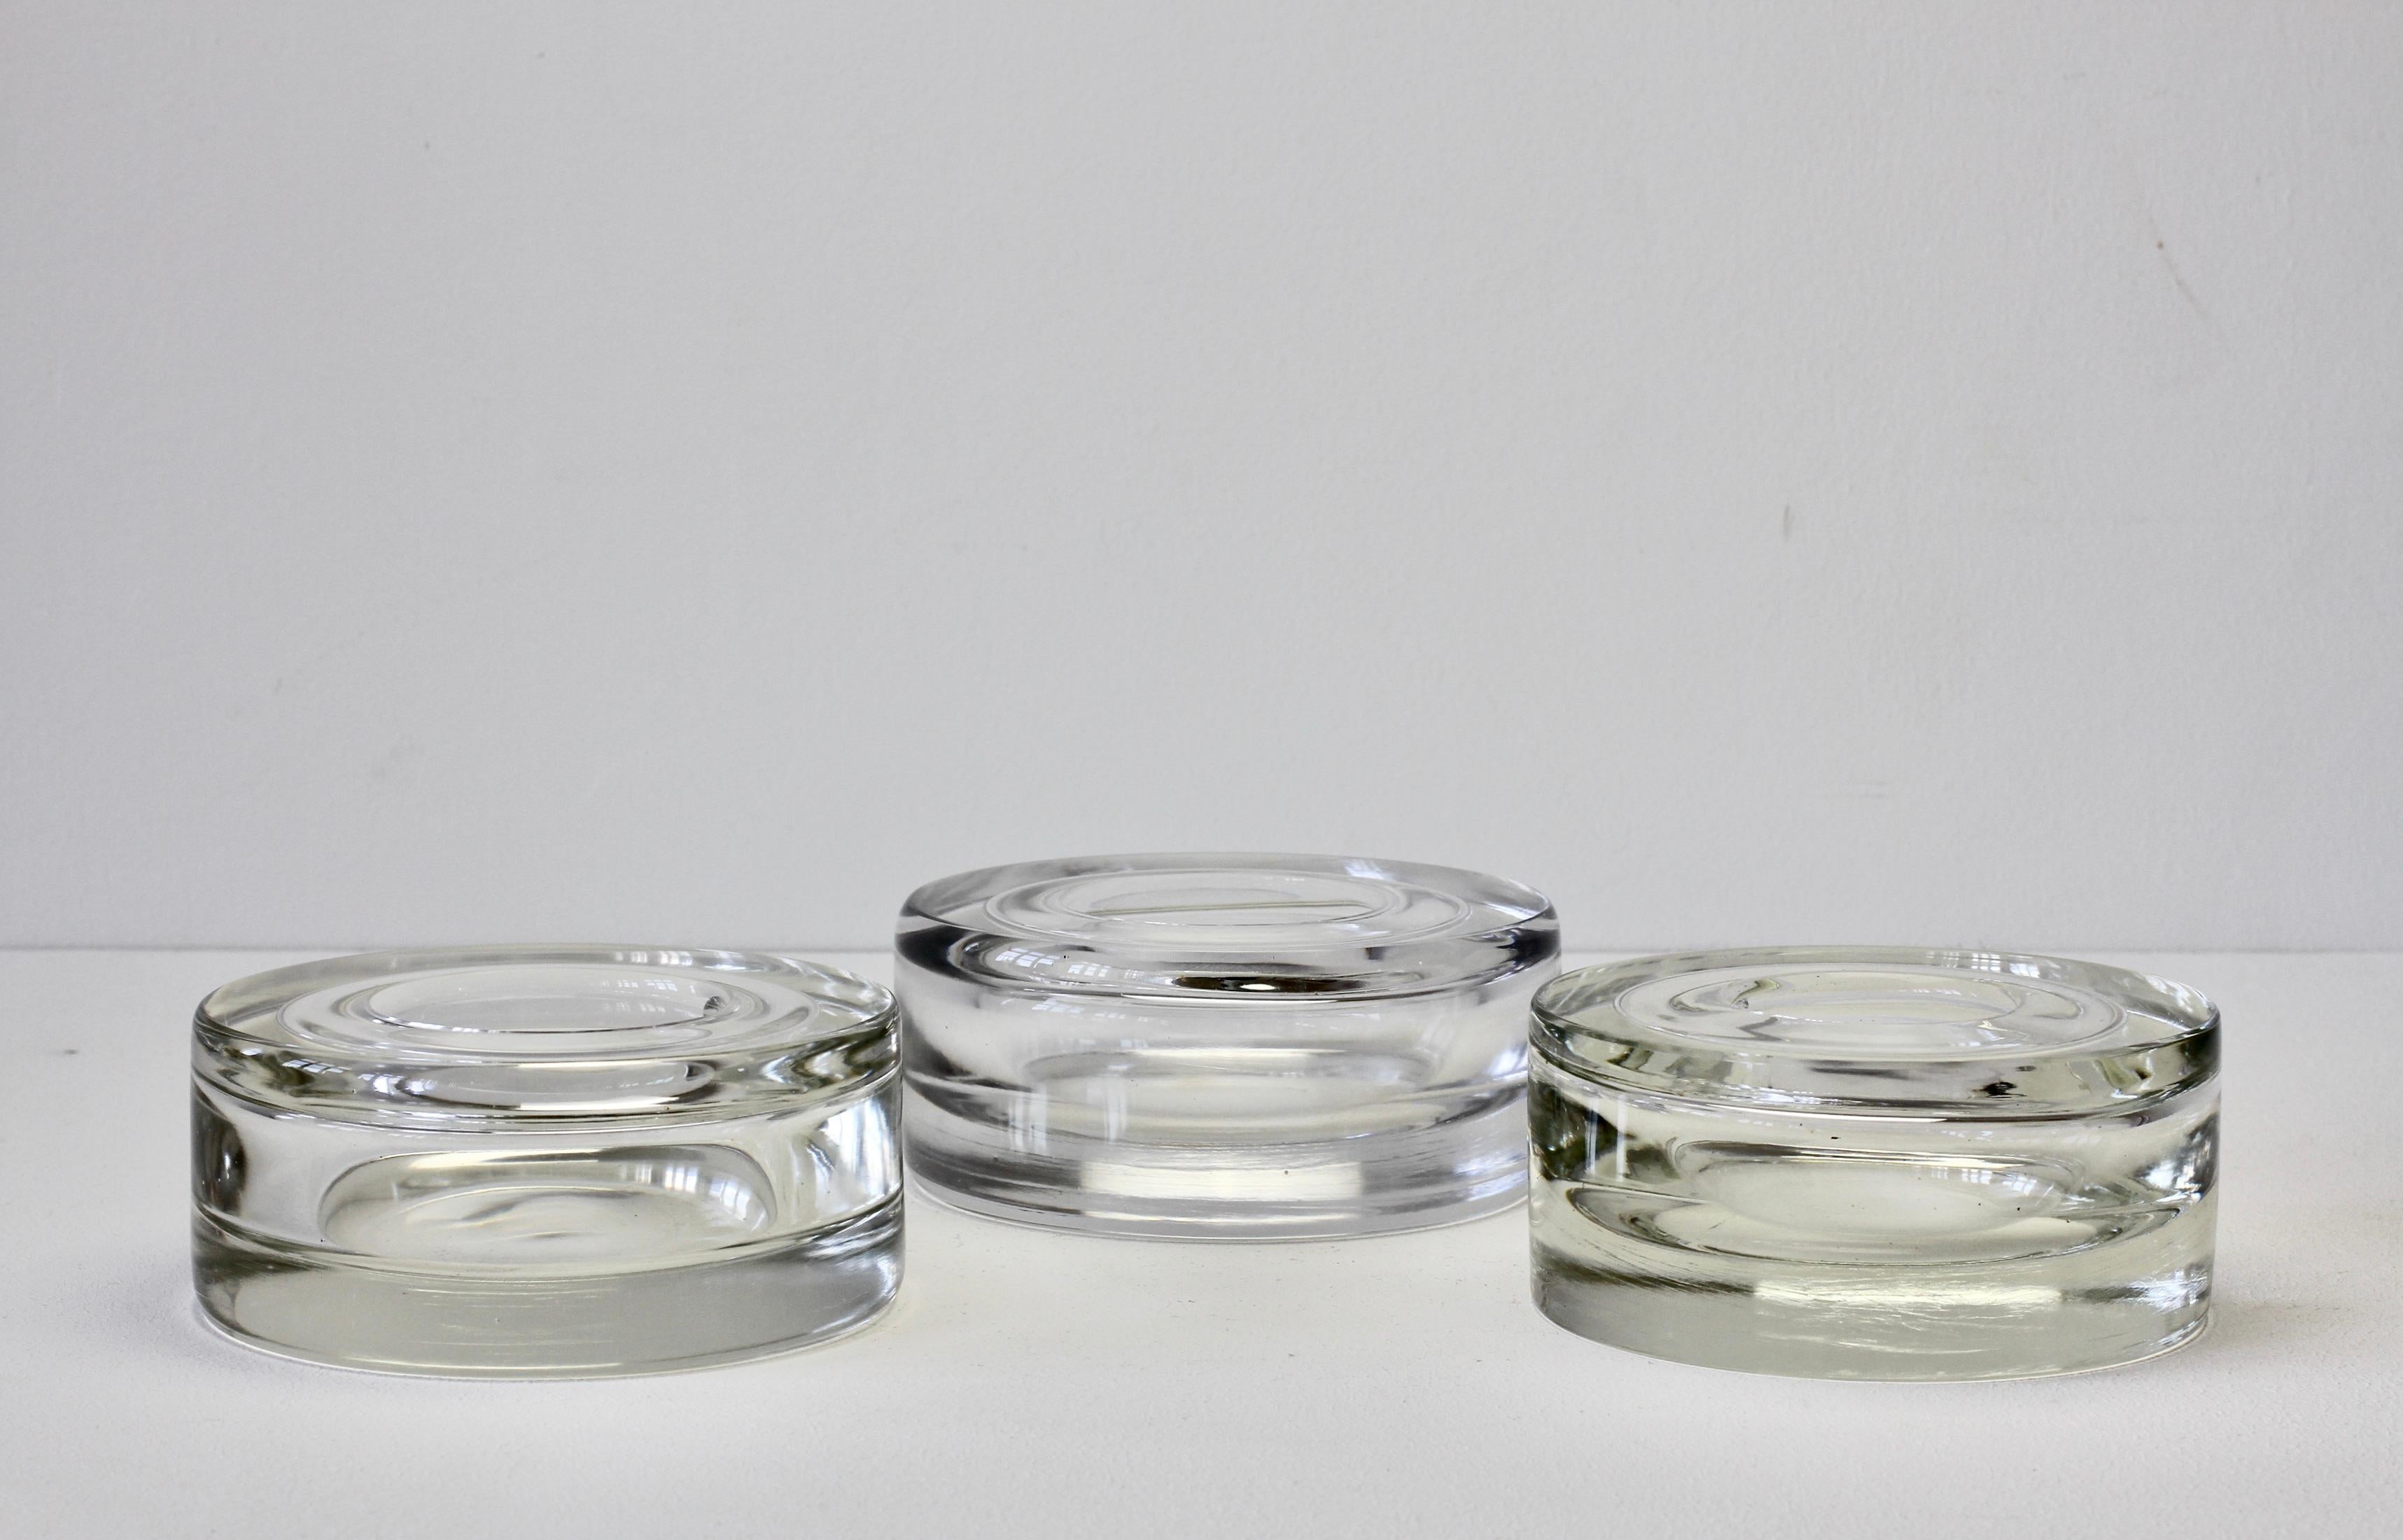 Antonio Da Ros for Cenedese, rare set / collection of three large heavy vintage Italian Murano glass bowls or ashtrays circa 1975. Utilizing the Sommerso technique these large, heavy pieces of glass each feature two submerged sections of clear glass